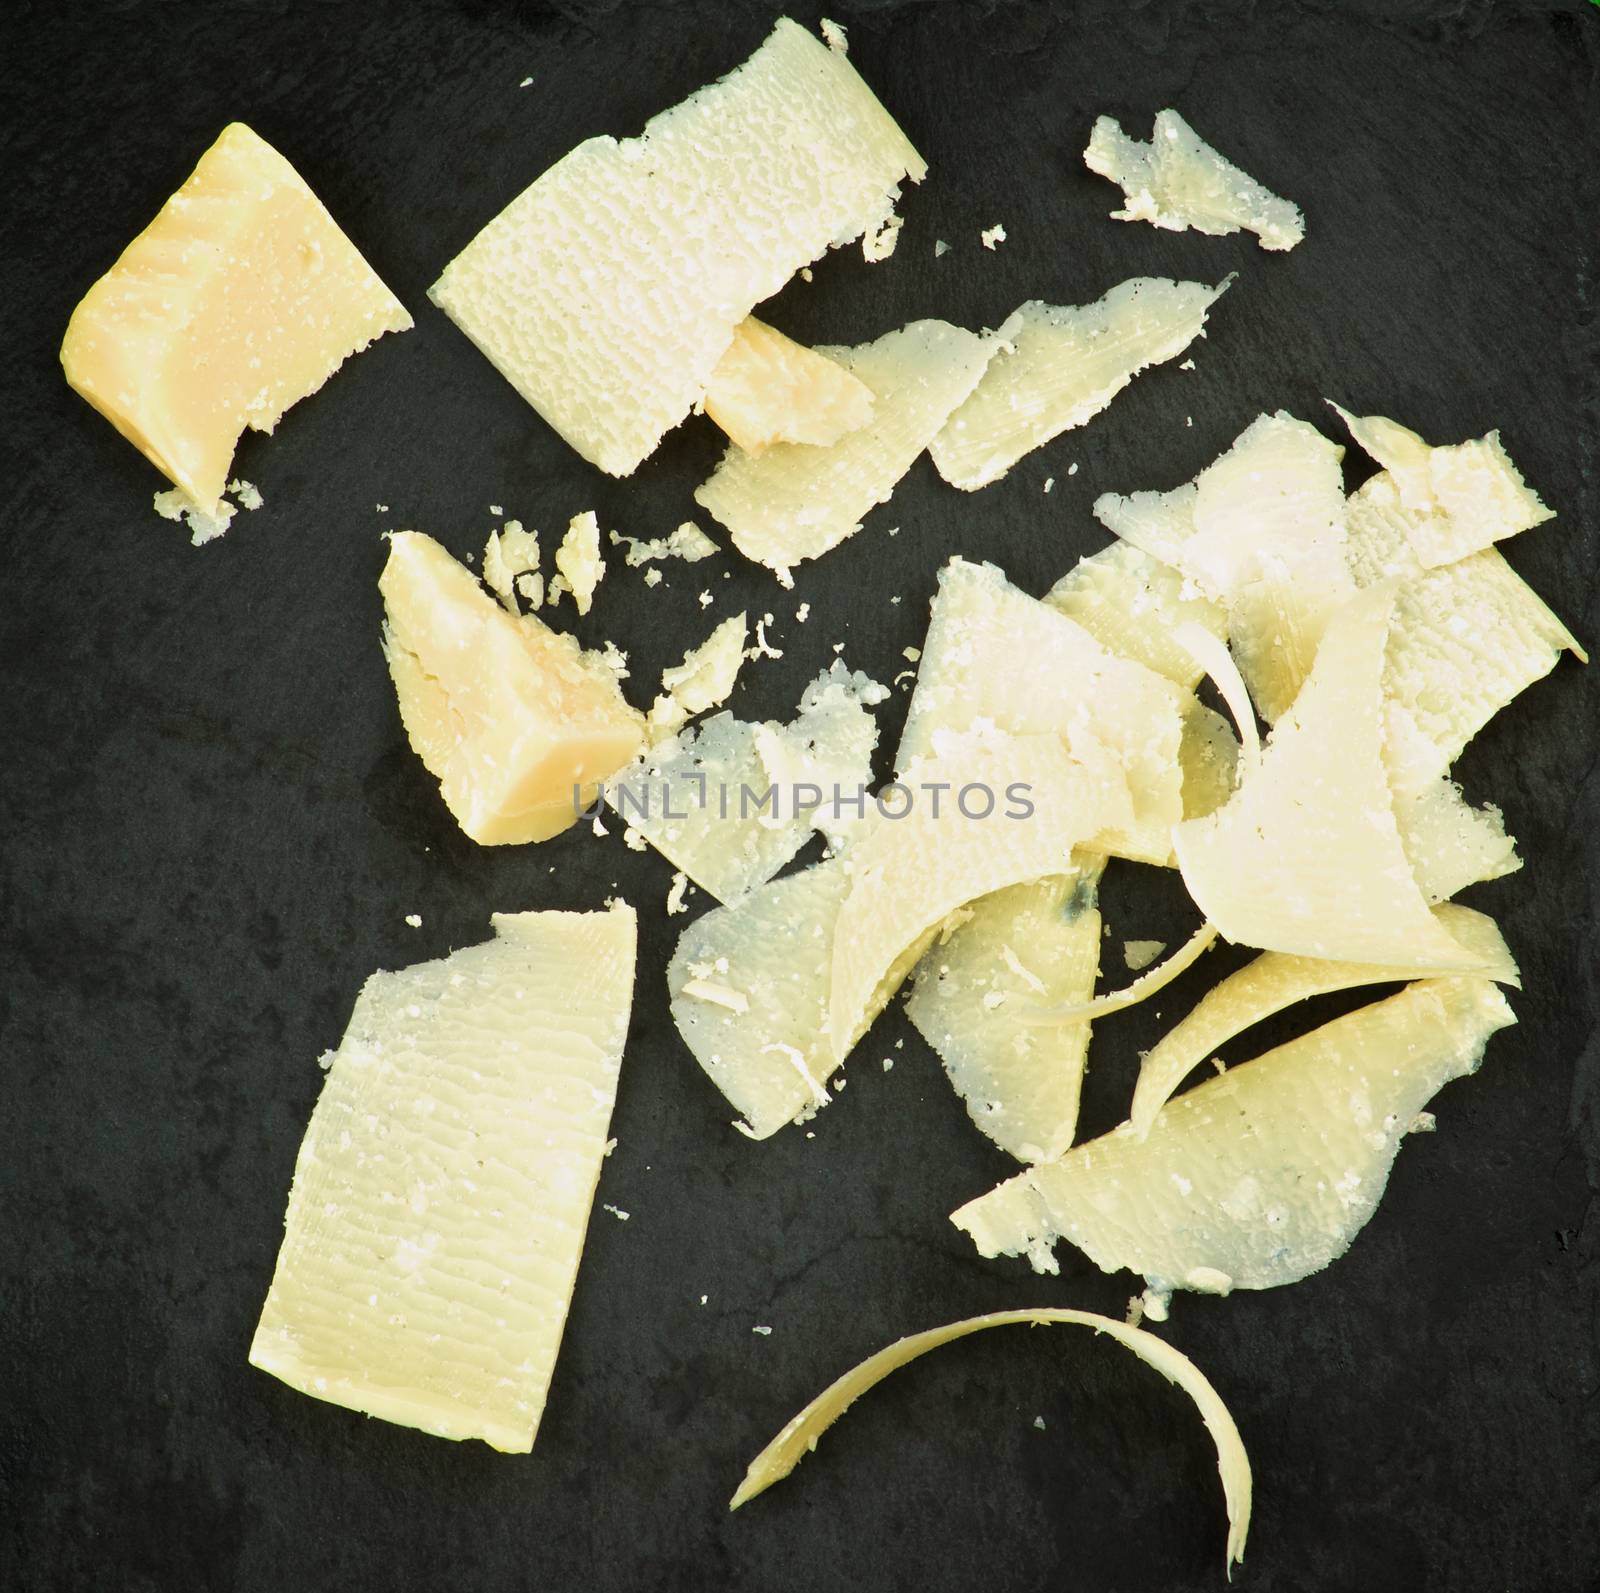 Parmesan Cheese Slices by zhekos